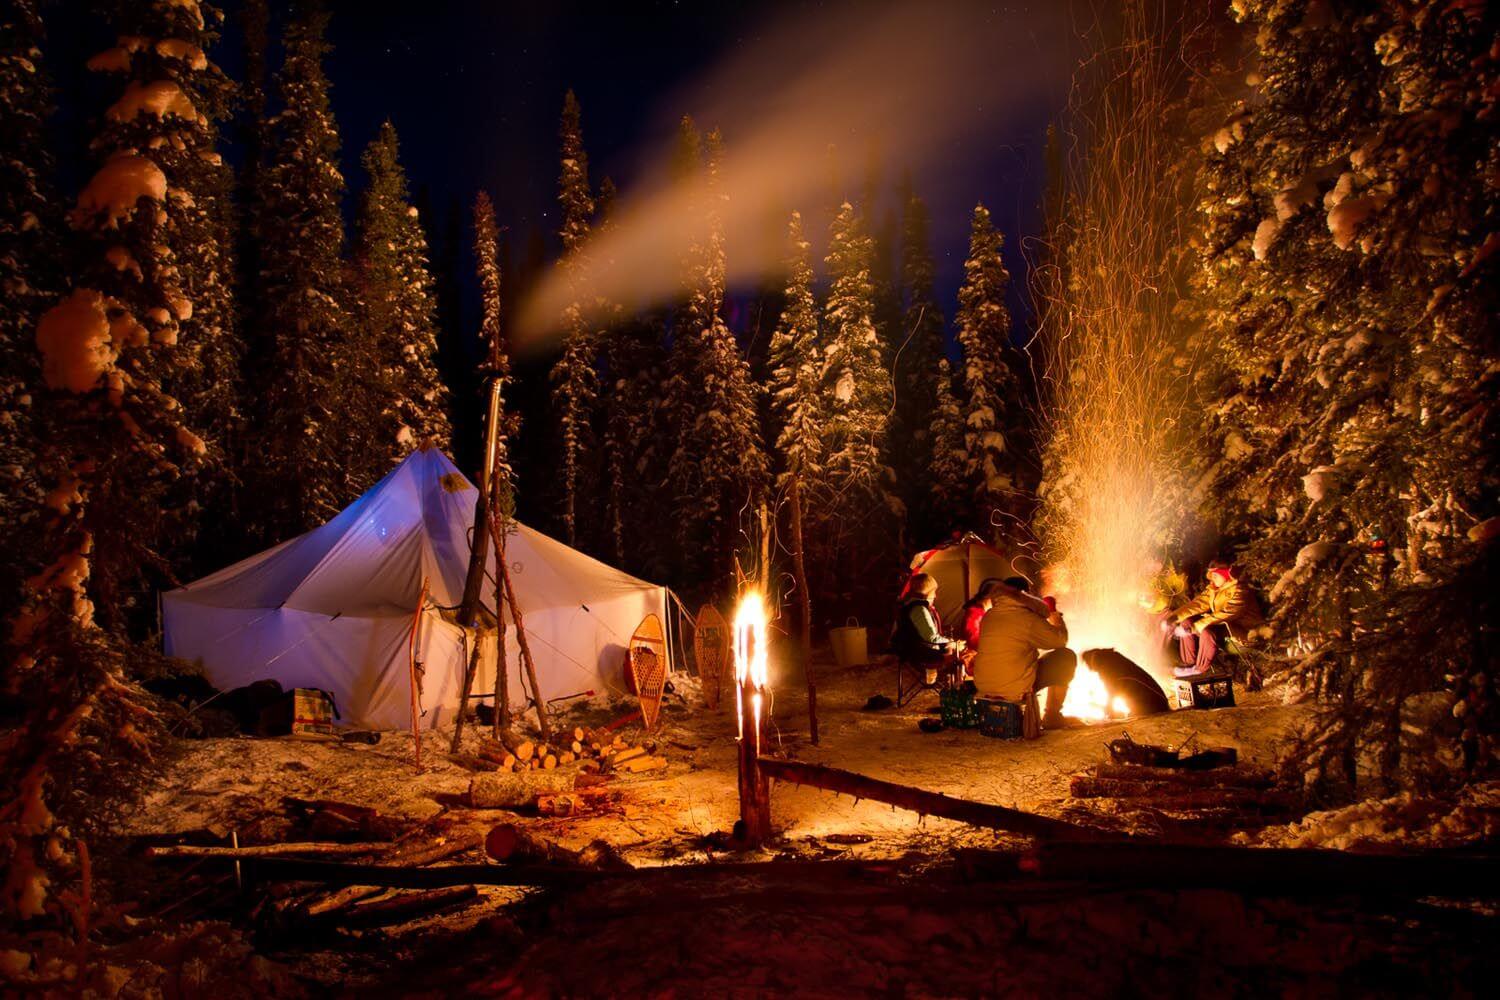 Go Camping And Enjoy The Great Outdoors